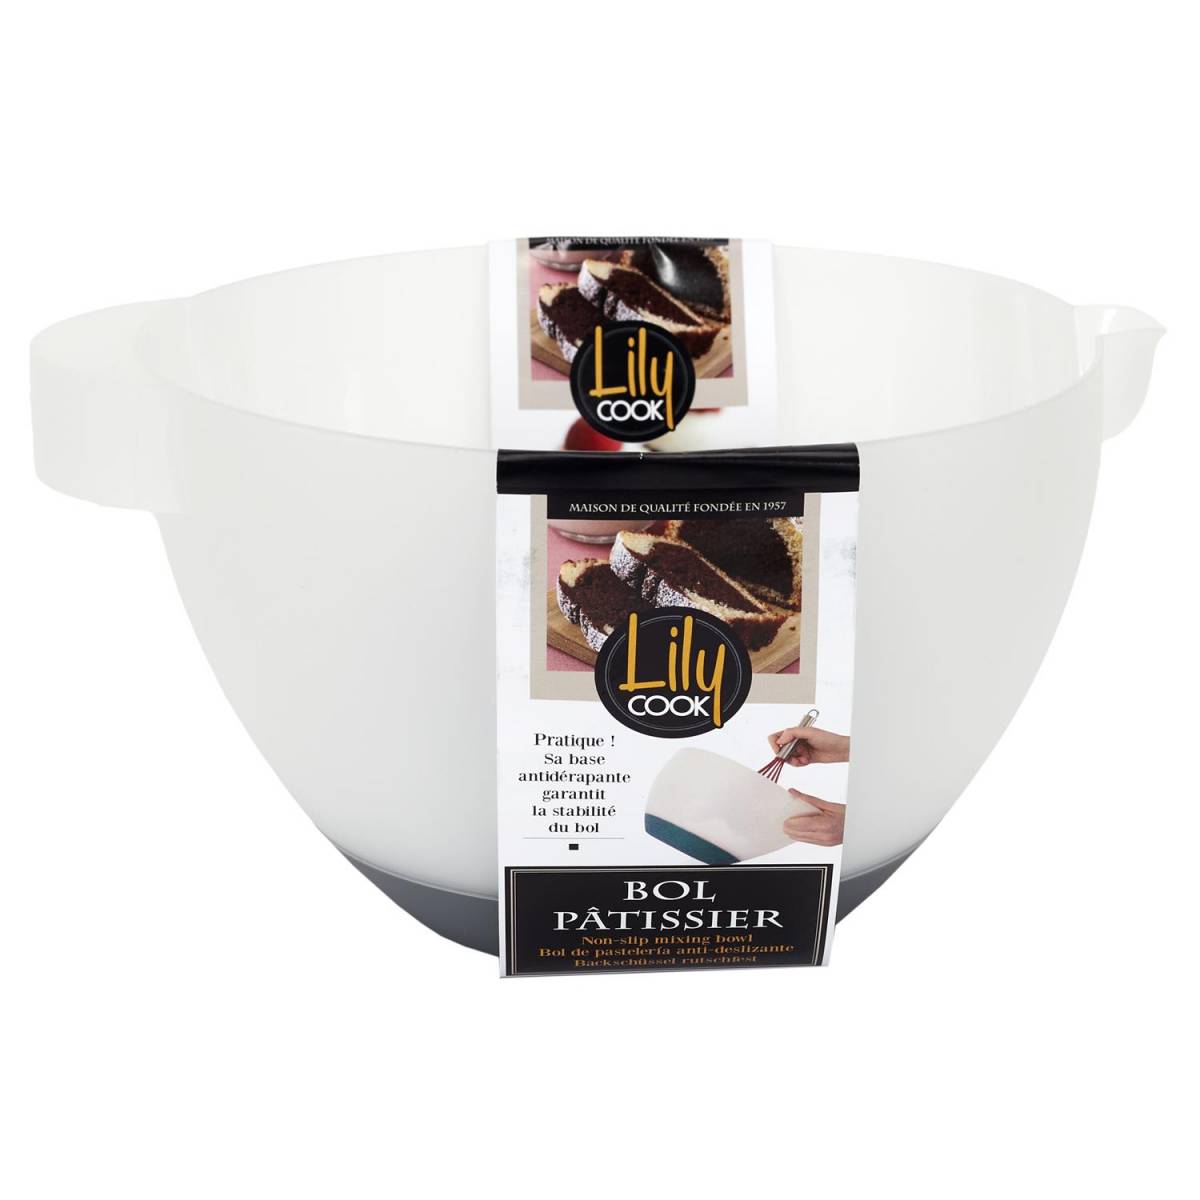 https://www.maxxidiscount.com/37943-large_default/lily-cook-non-slip-mixing-bowl.jpg